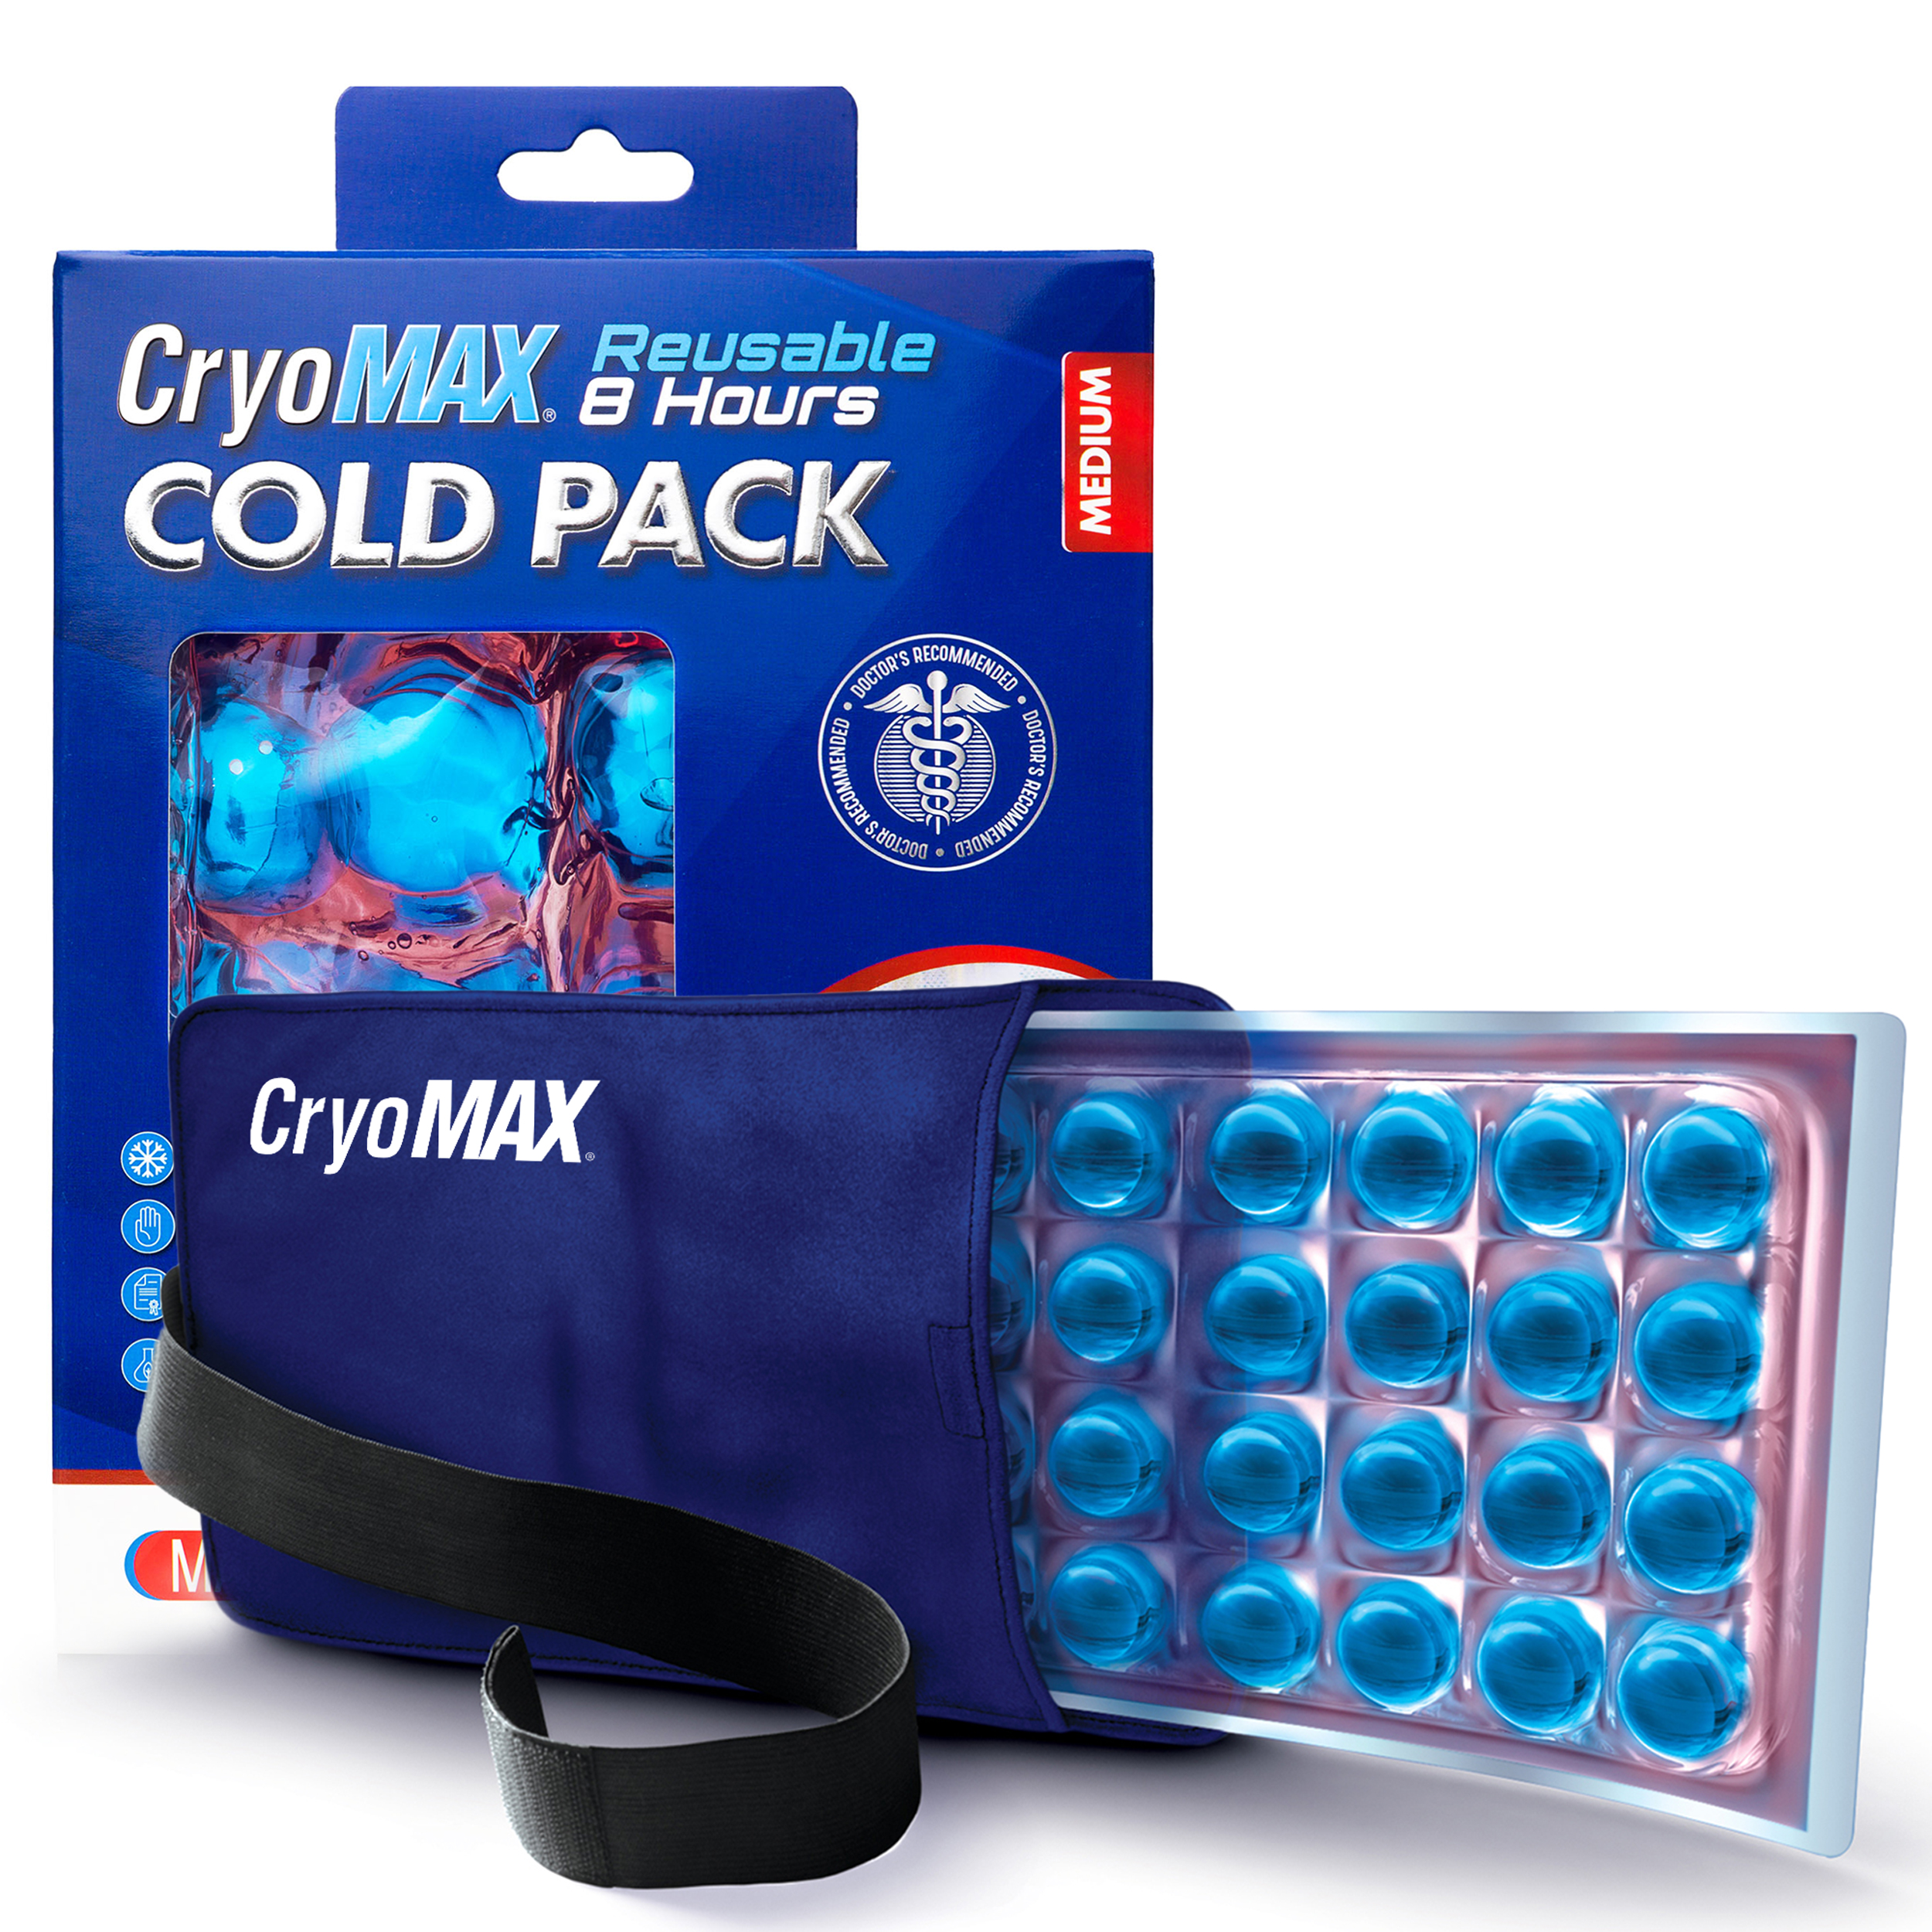 CryoMax Reusable 8 Hour Medium Cold Pack - image 1 of 7